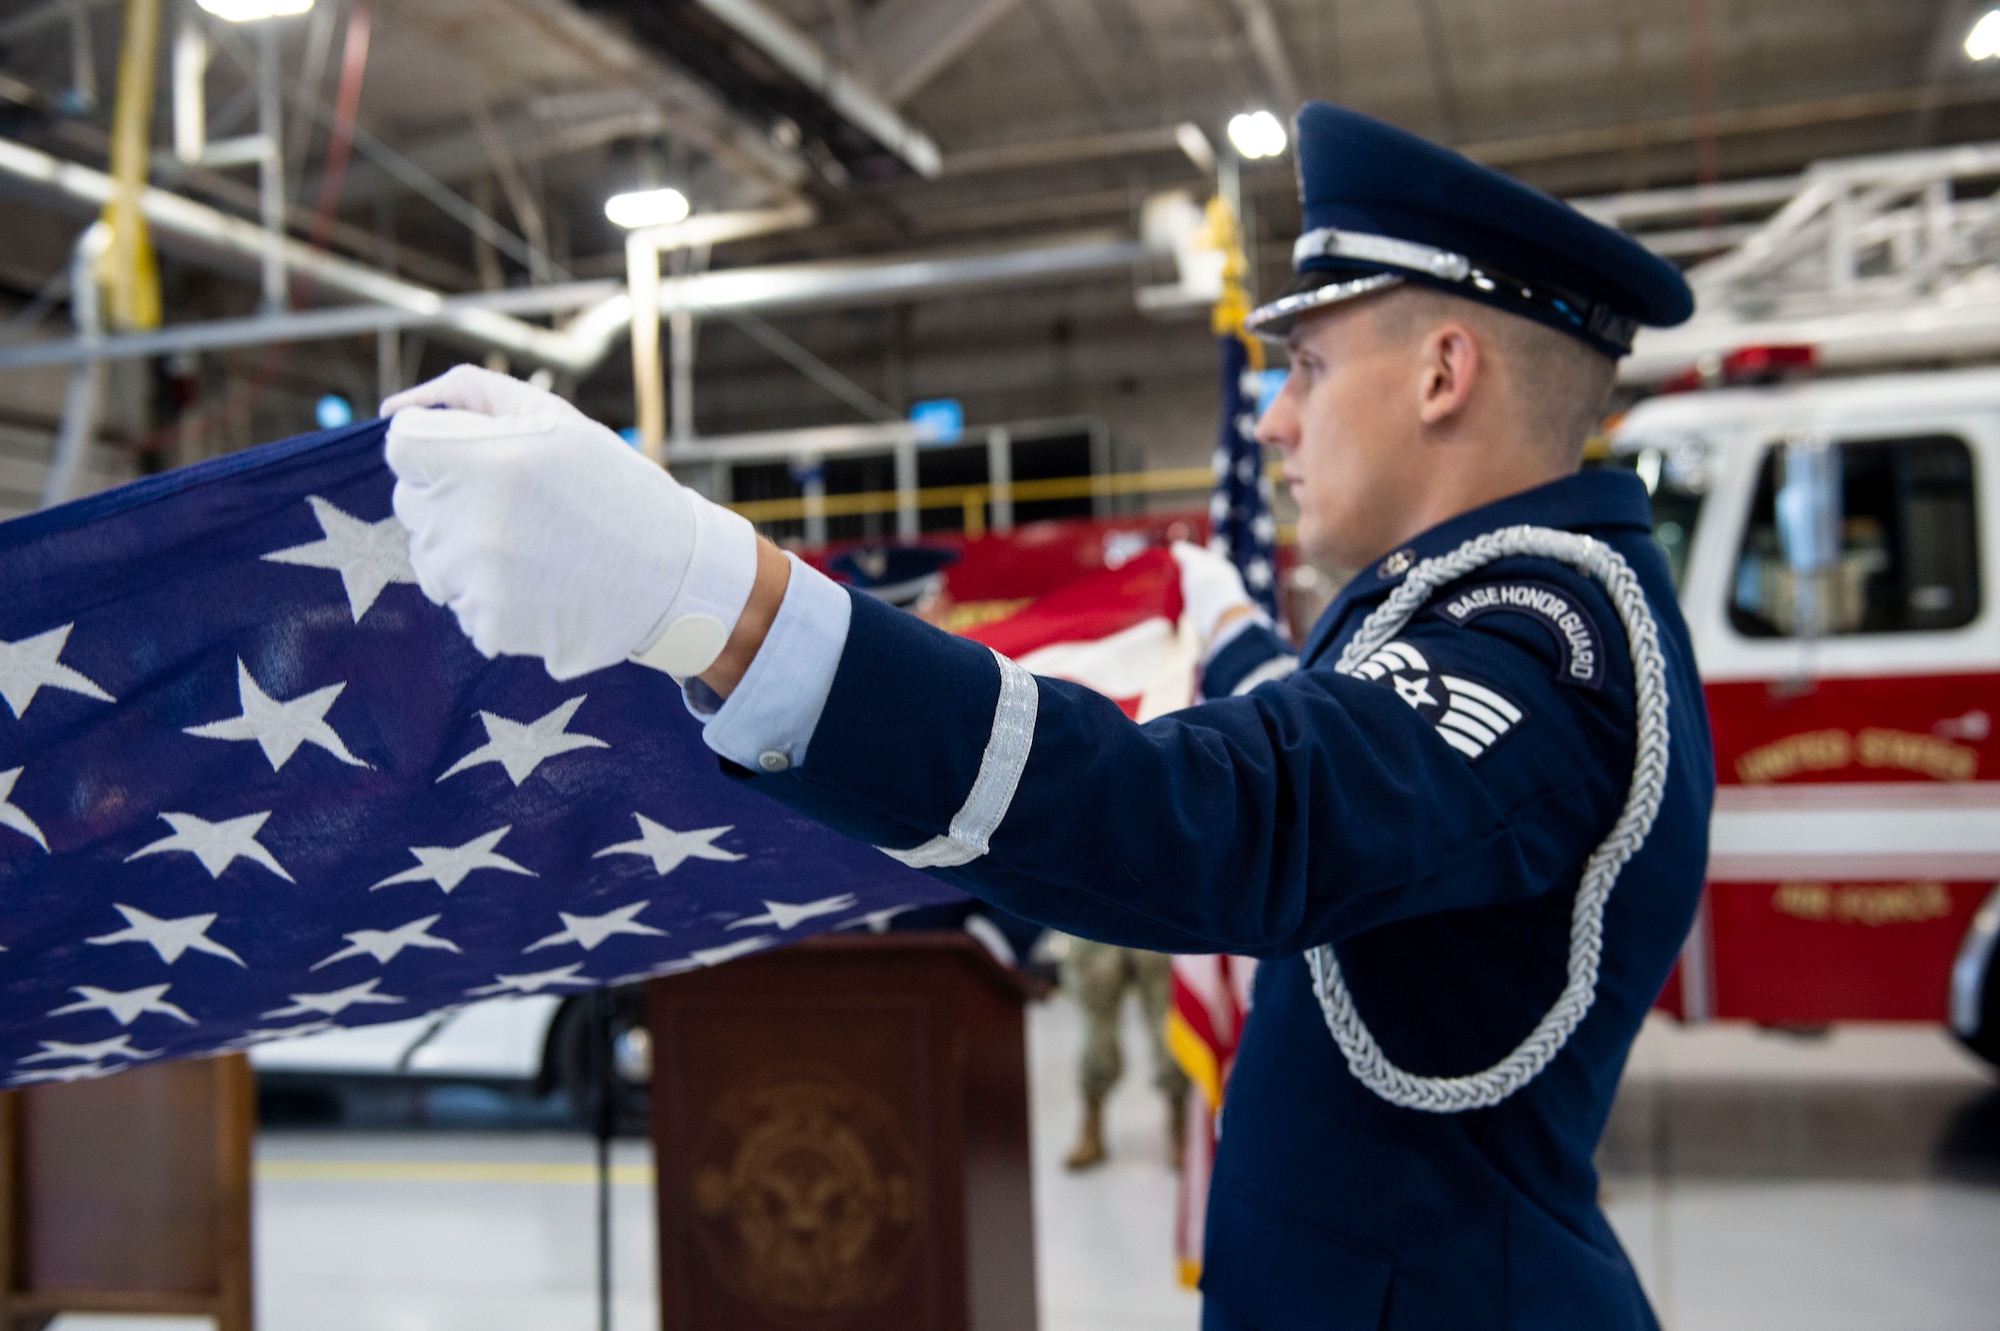 Staff Sgt. Ryan Webster, Grissom honor guardsmen, holds the flag out during a flag folding ceremony during the 9/11 Remembrance ceremony, September 11, 2022, at Grissom Air Reserve Base, Indiana. The ceremony marked the 21st anniversary of the events of September 11, 2001. (U.S. Air Force photo by Staff Sgt. Alexa Culbert)